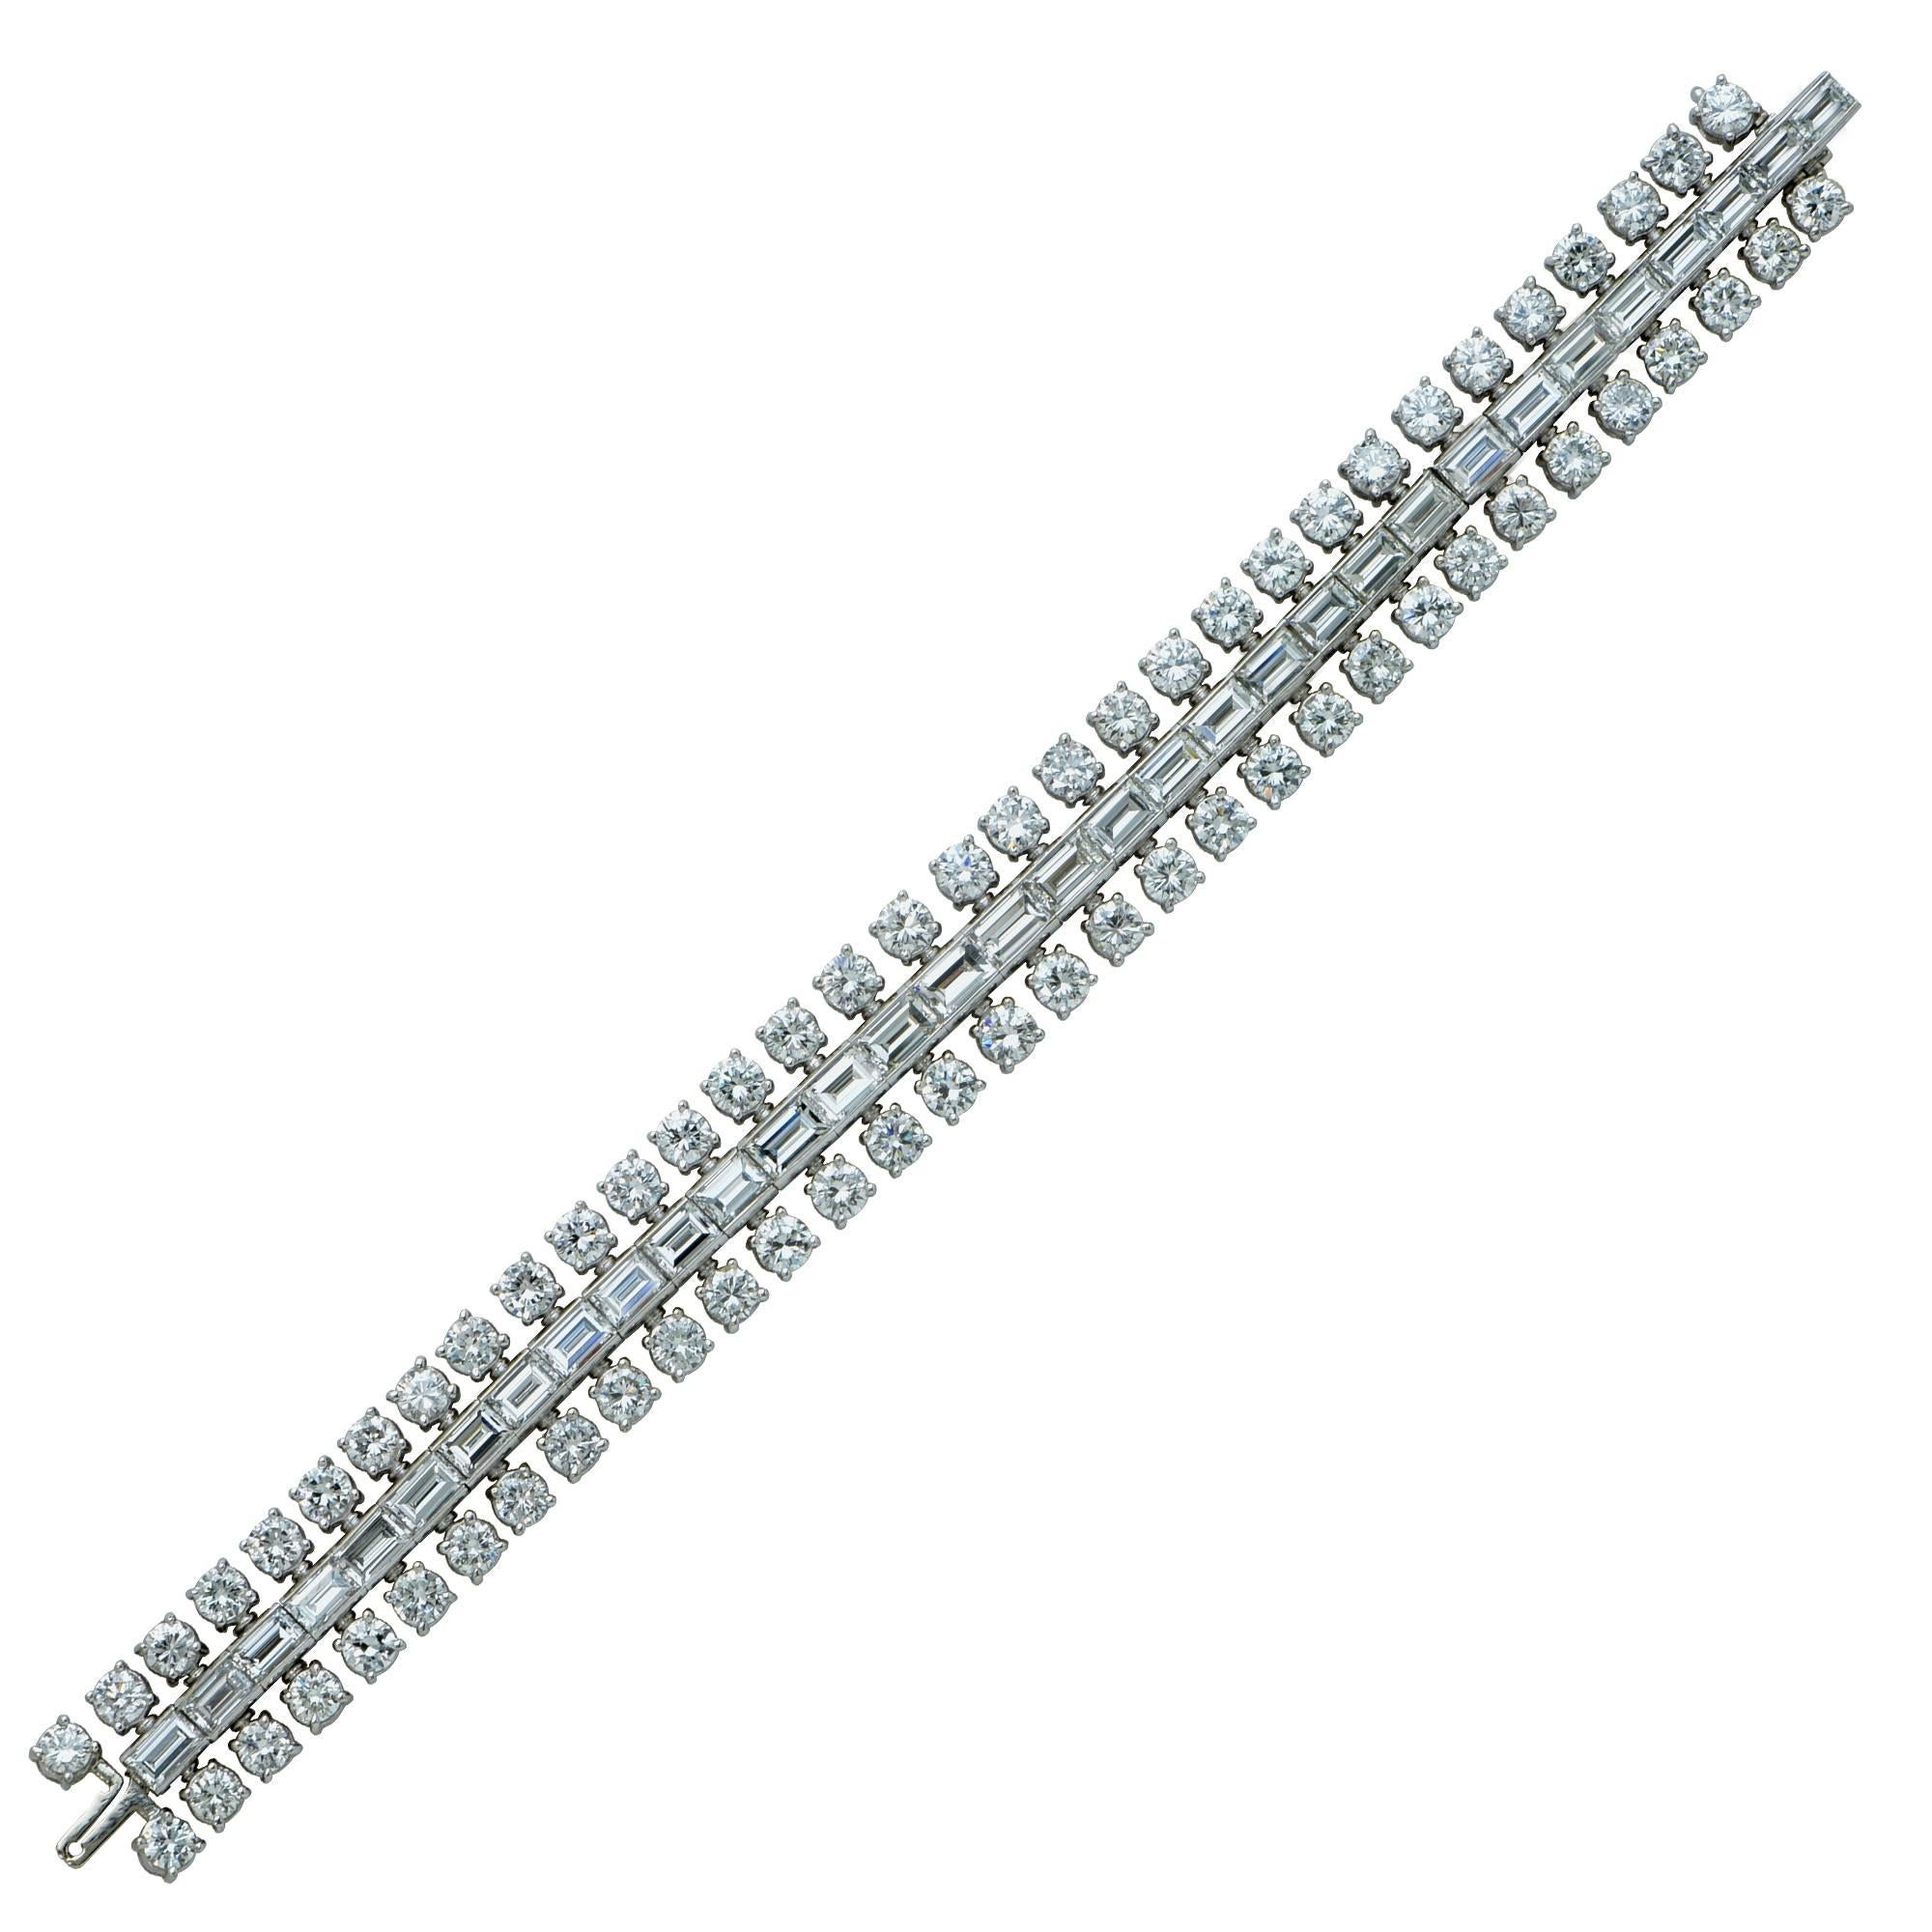 Platinum hand made bracelet containing 66 round brilliant cut diamonds weighing approximately 19.50cts F color VS clarity and 33 step cut diamonds weighing approximately 13.50cts F Color VS clarity - Circa 1950's.

Measurement: 7 inch